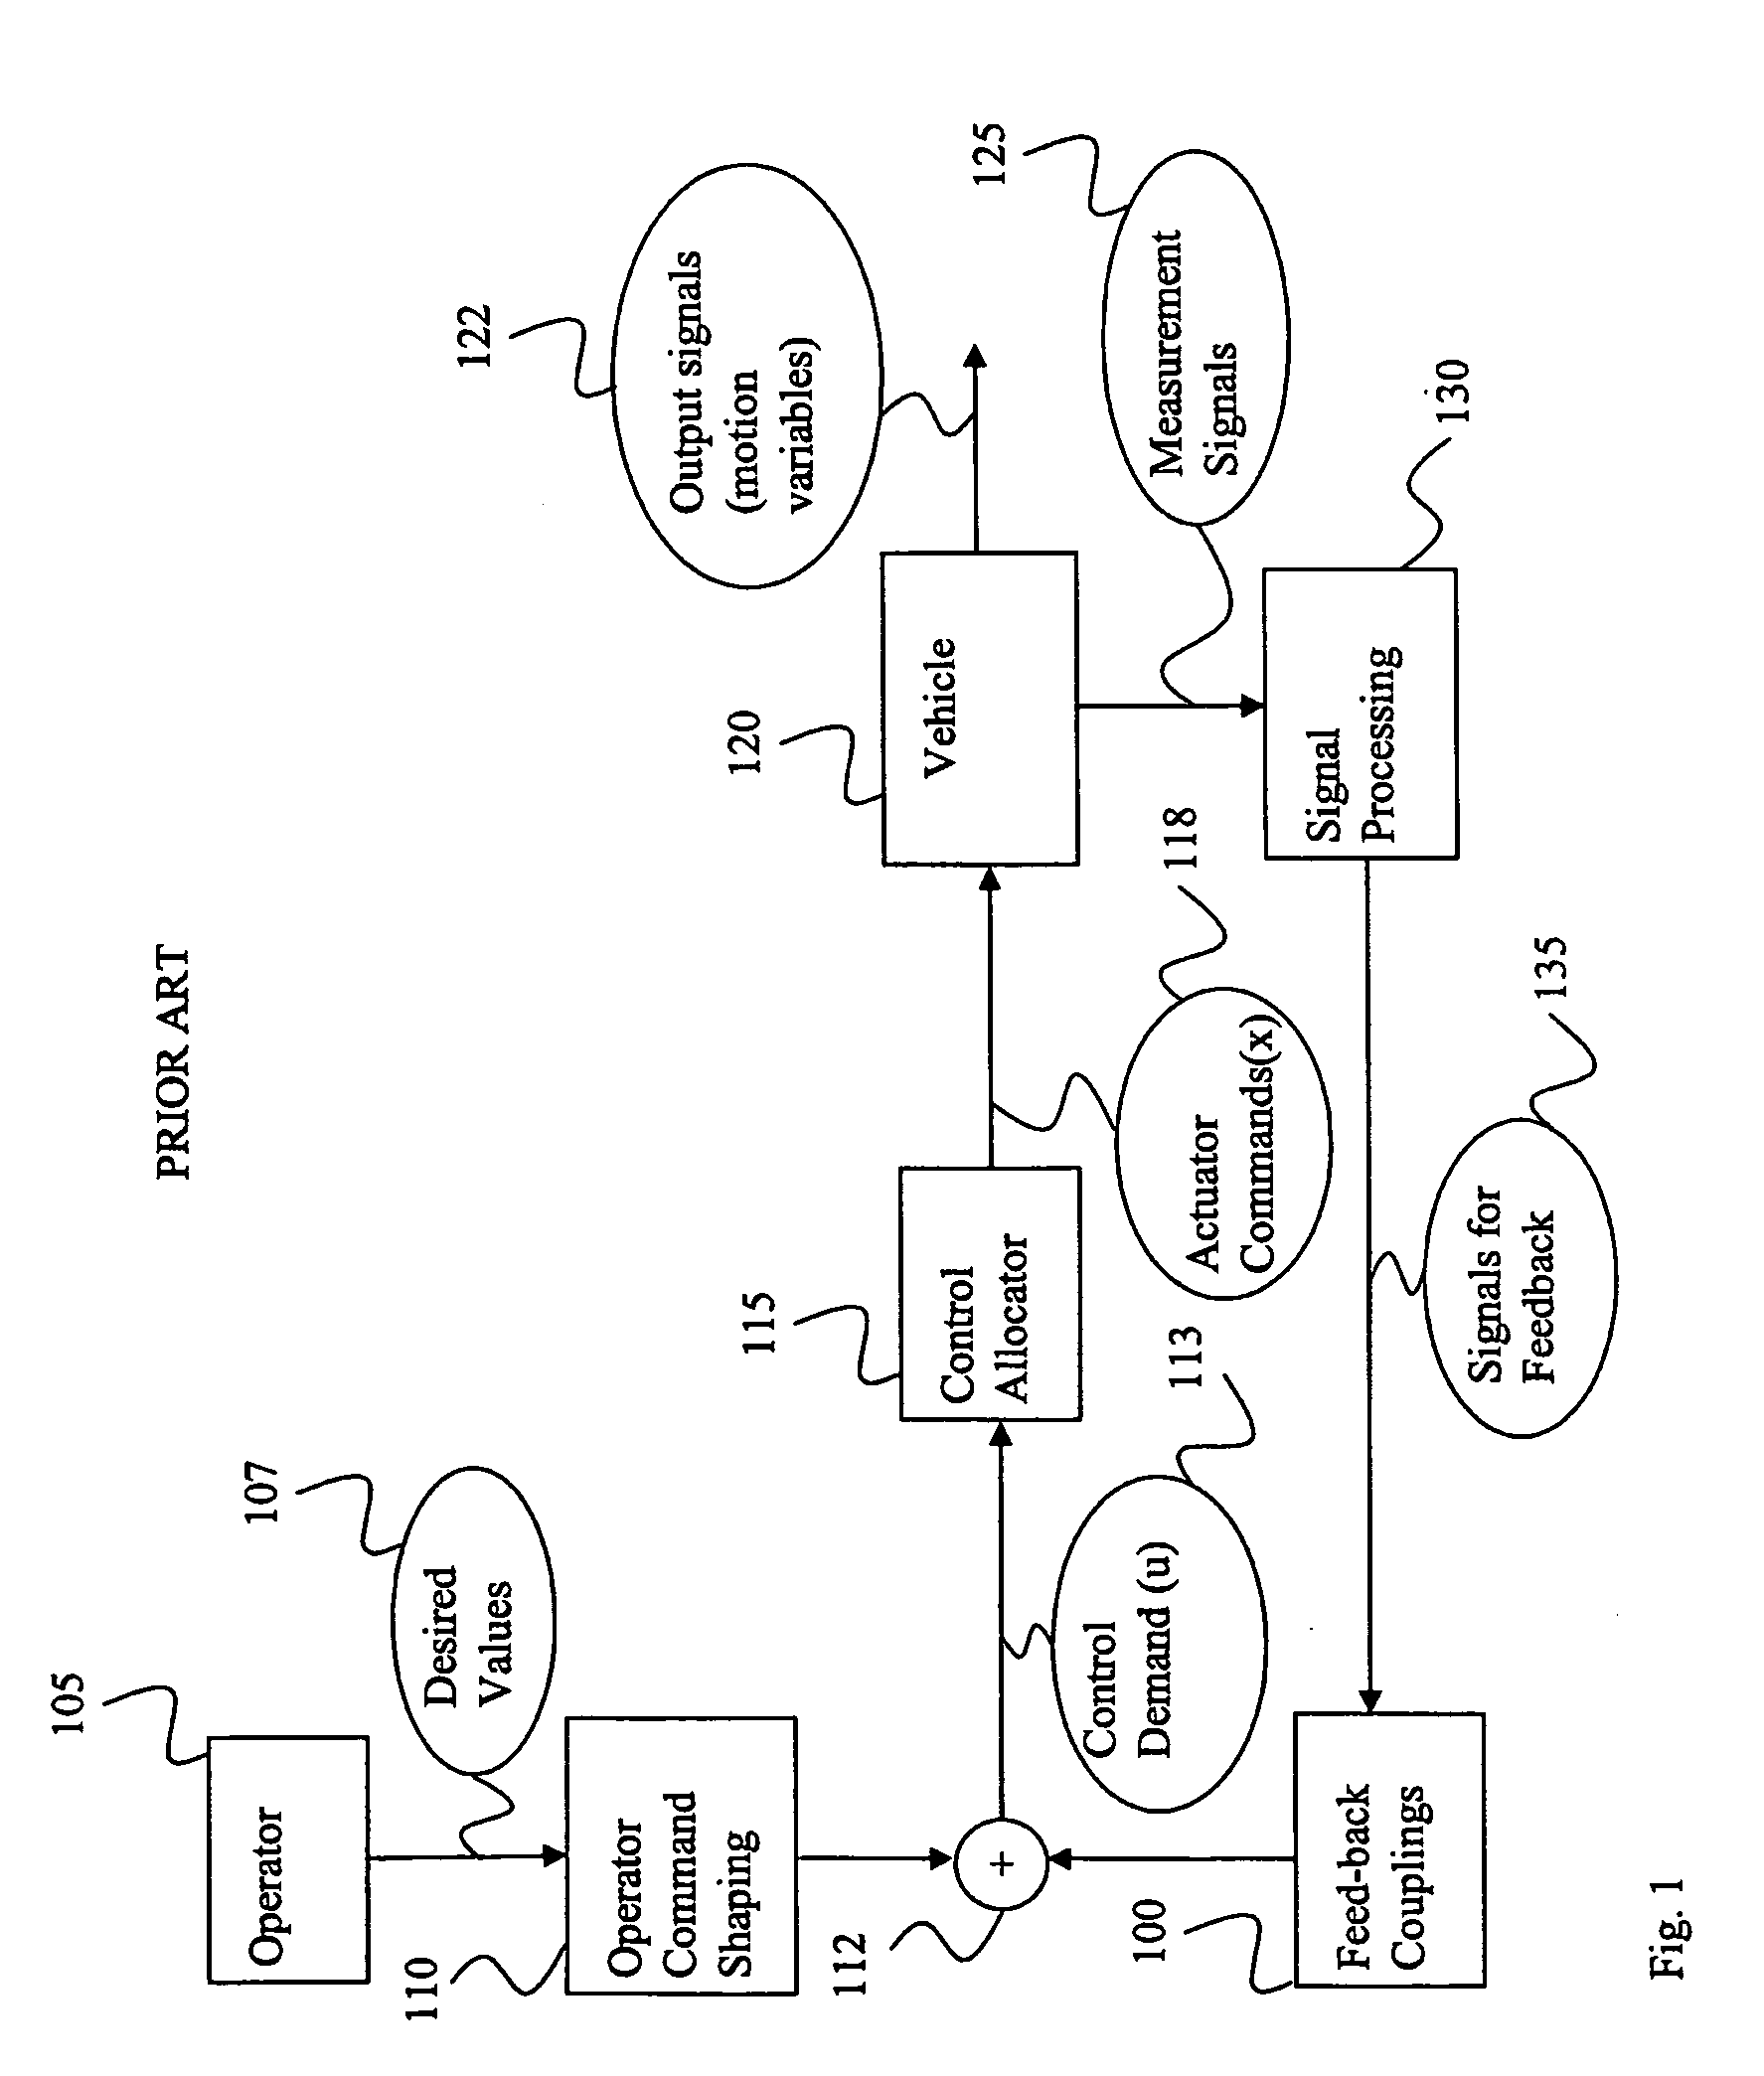 Vehicle control system and method using control allocation and phase compensation